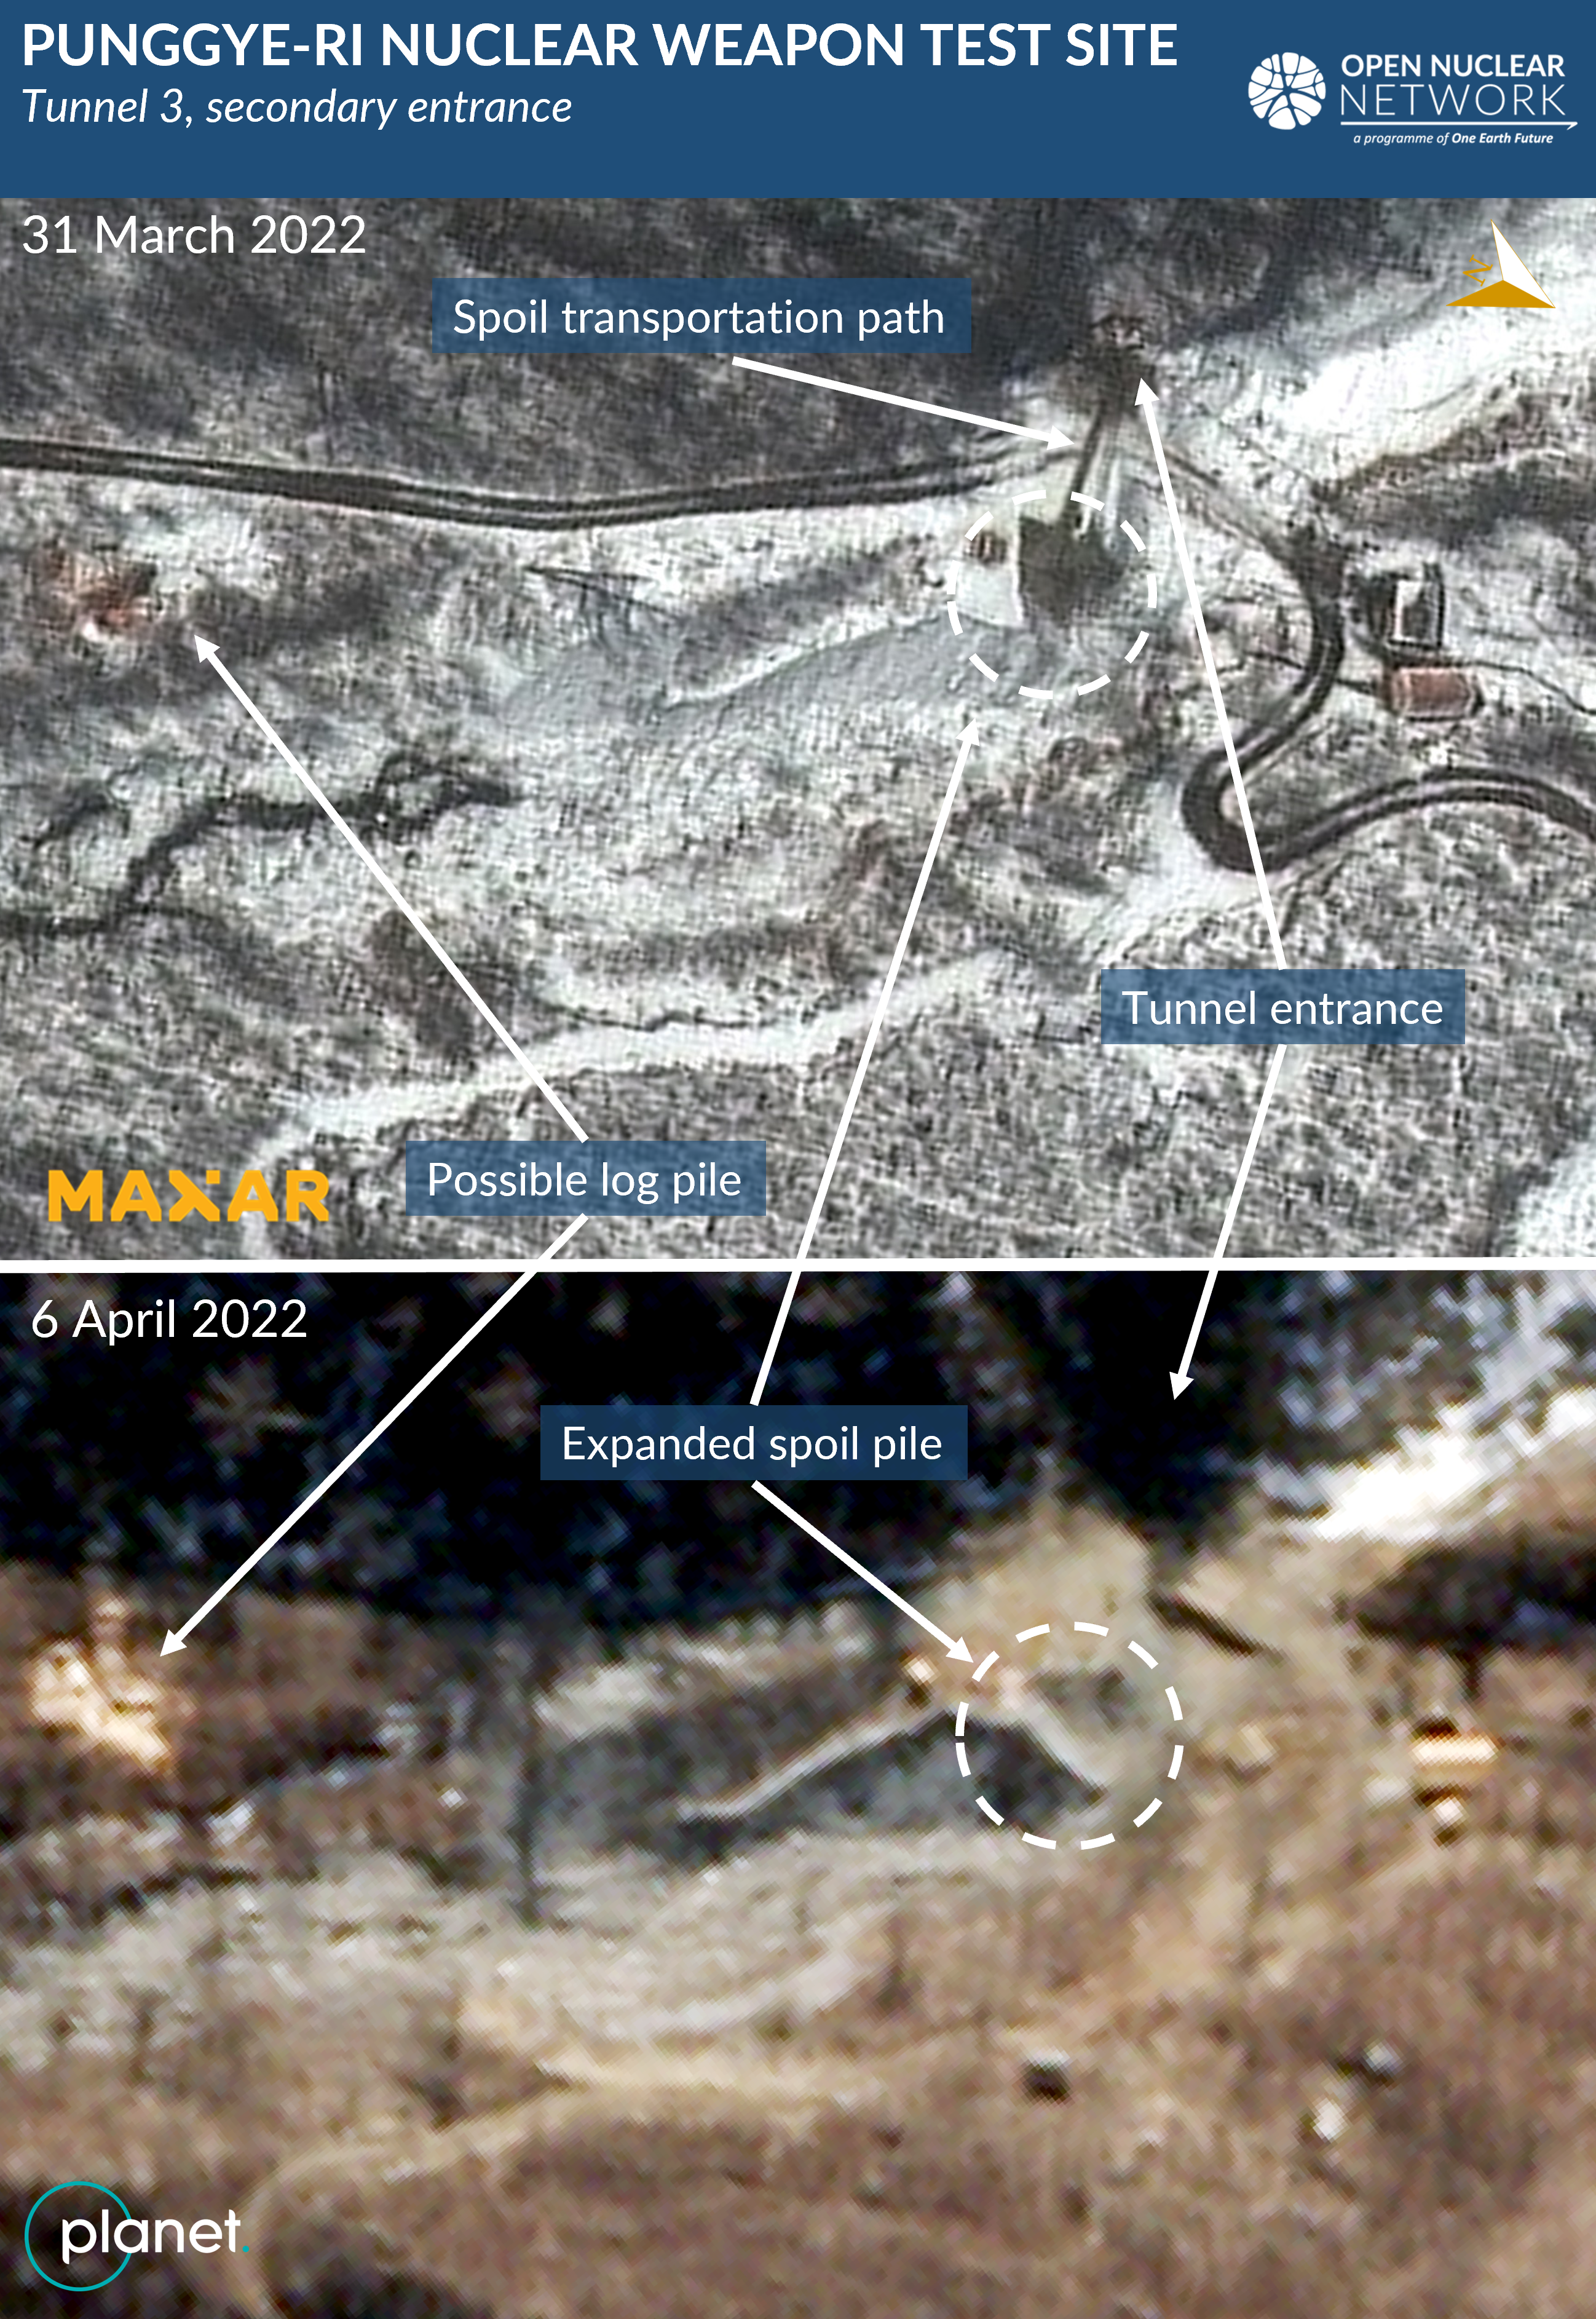 Comparison of the satellite images from 31 March and 6 April 2022 showing the spoil pile near the secondary entrance to Tunnel 3